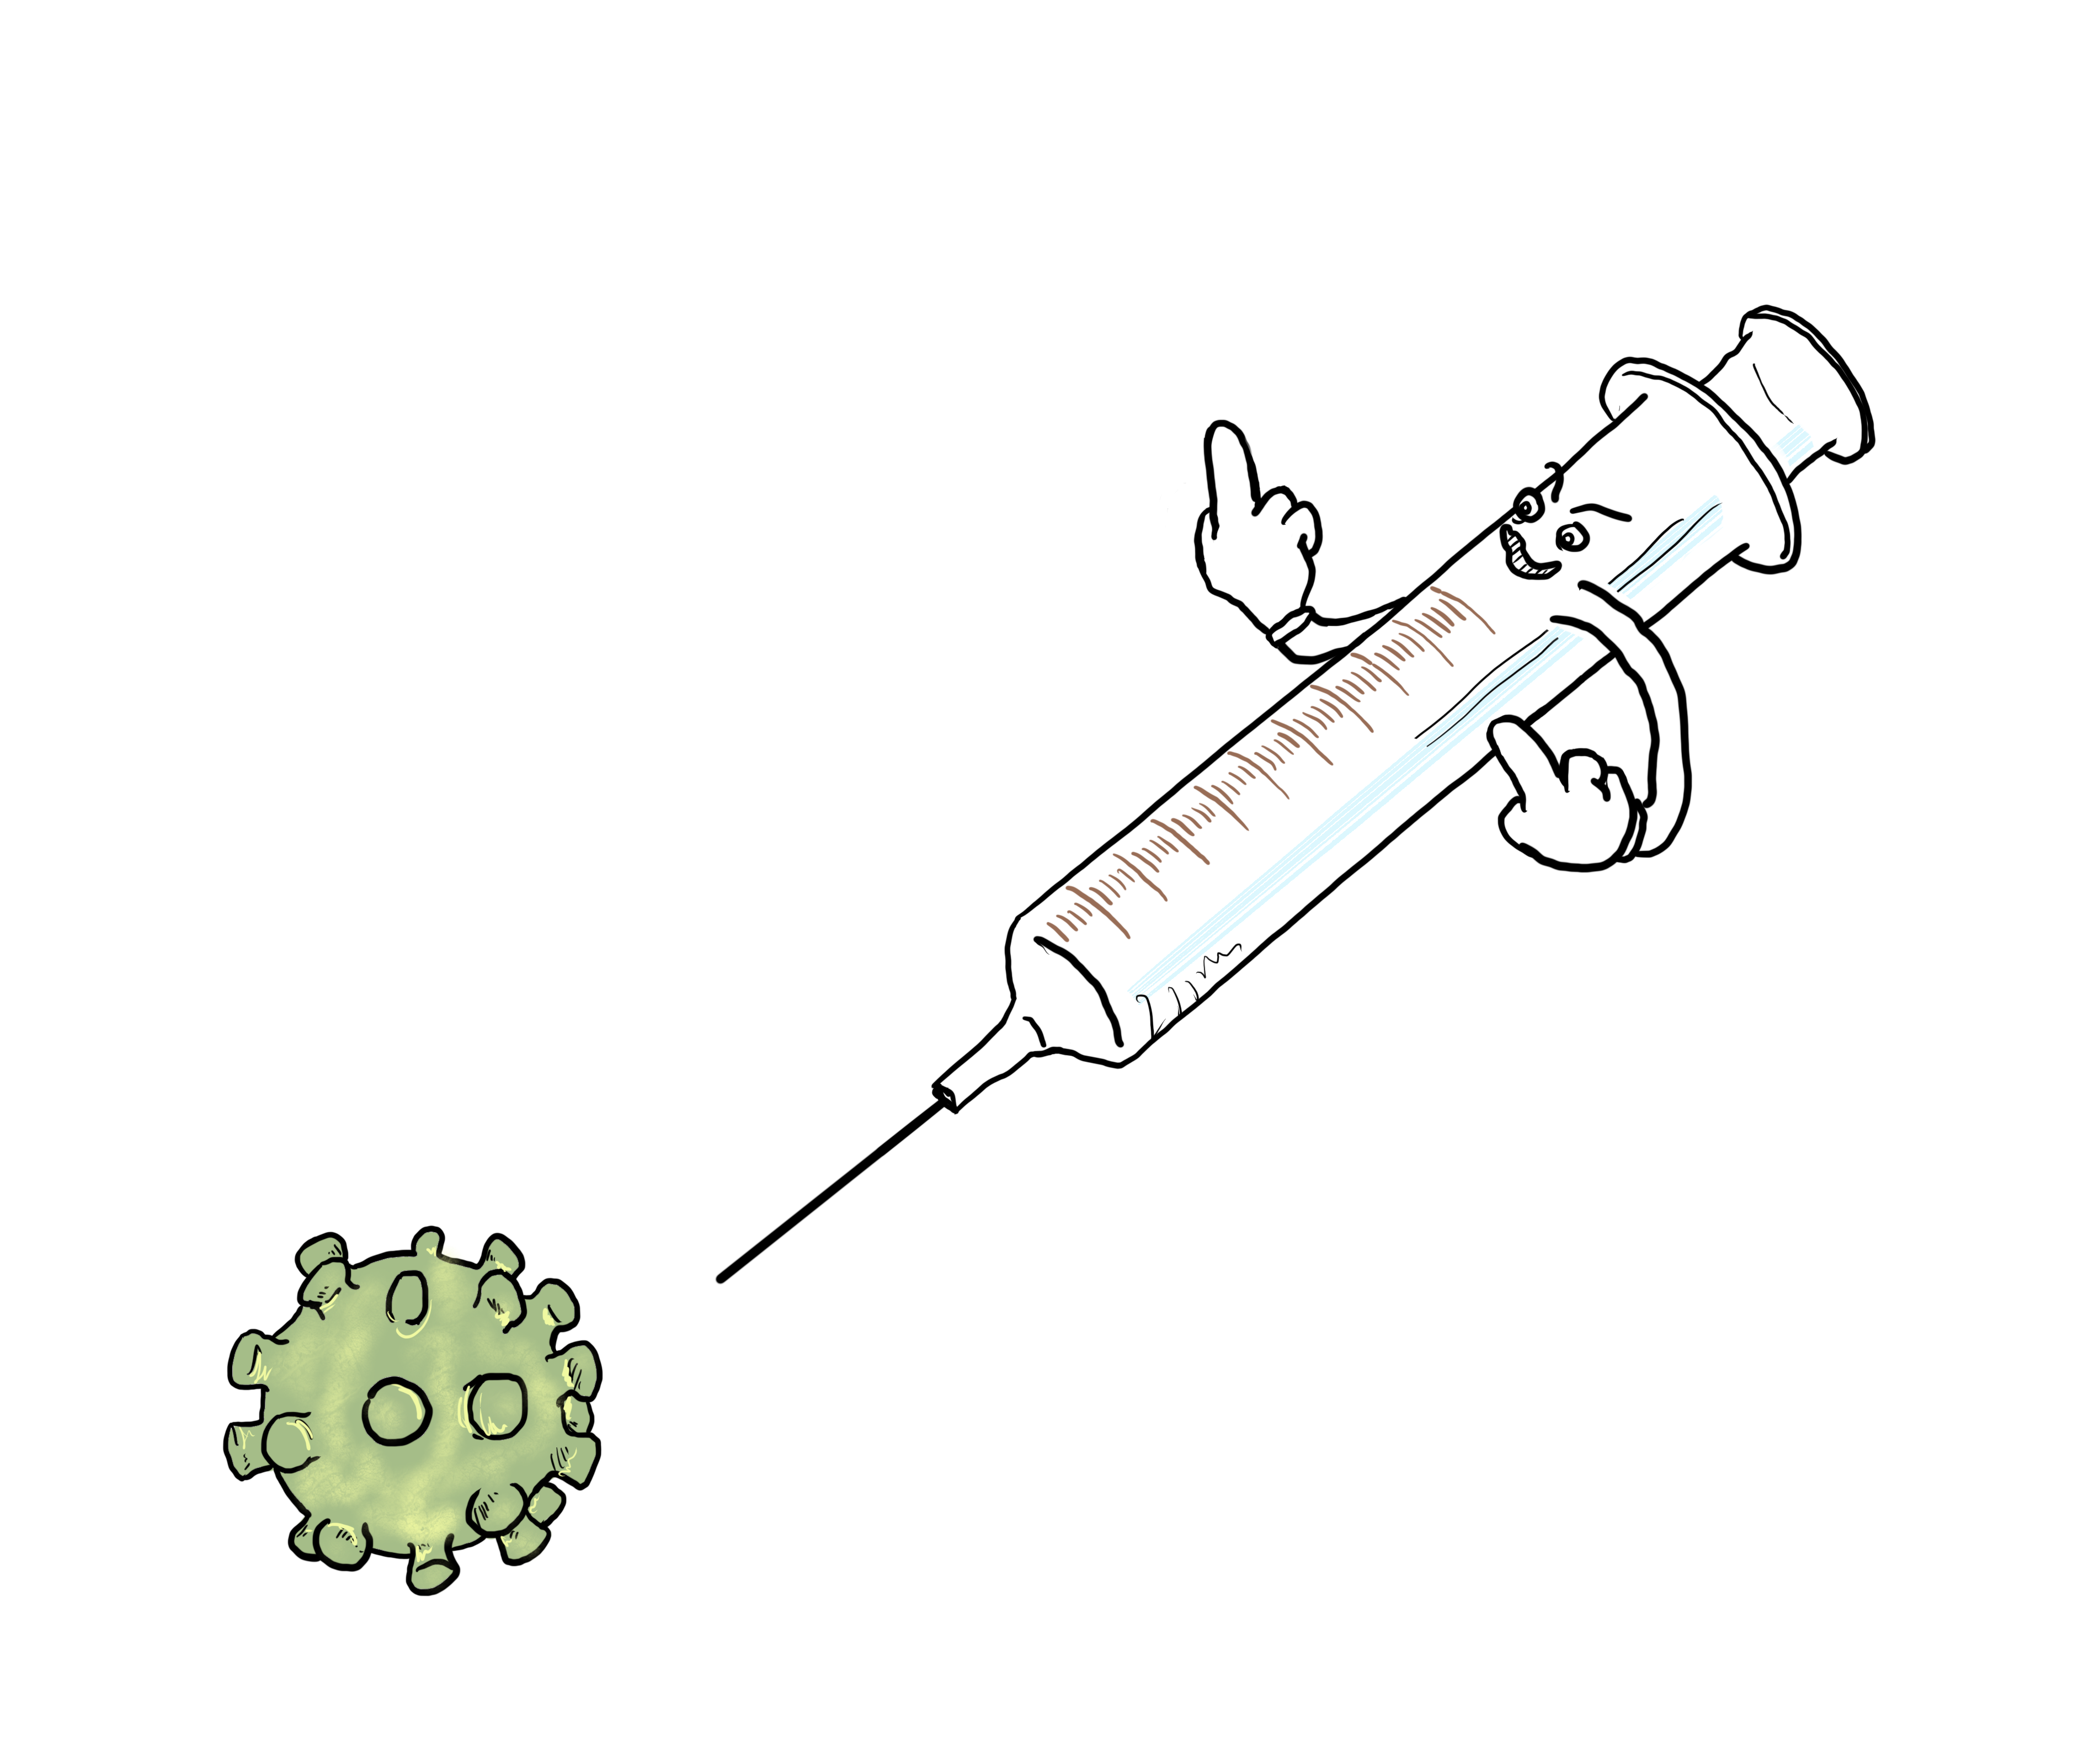 A drawing of a personified evil looking syringe flipping the bird with both hands, needle pointed straight at the green virus below him.